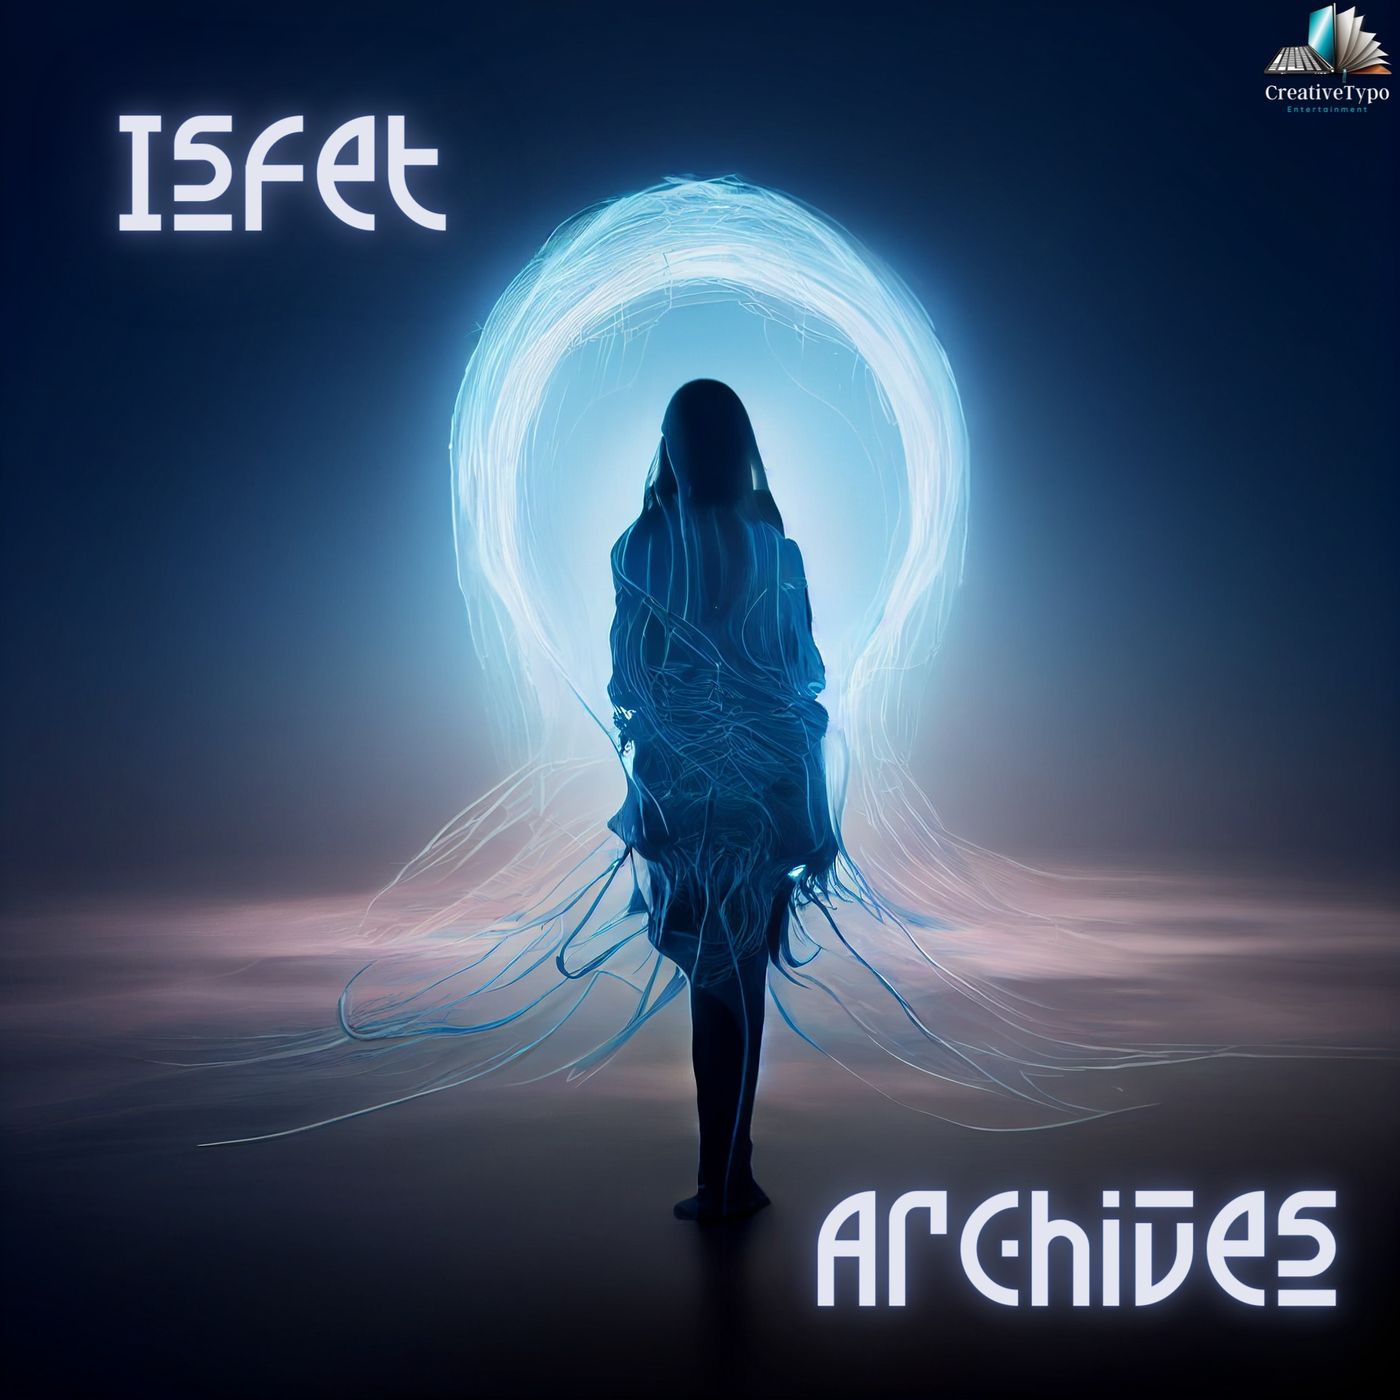 Isfet Archives: A Mythic Audio Drama podcast